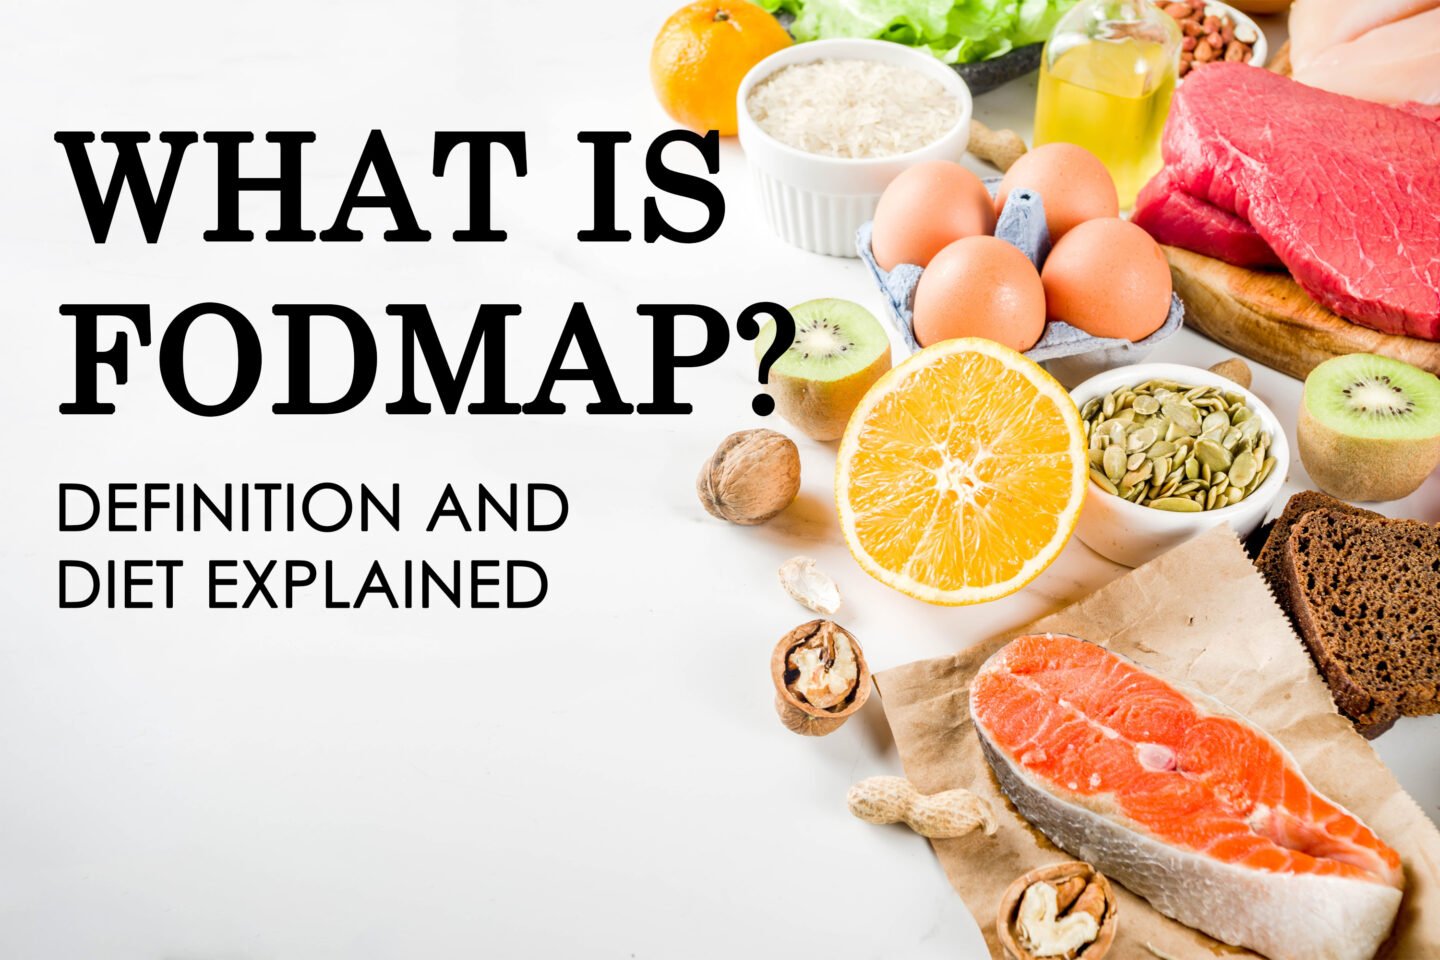 what is fodmap diet and definition